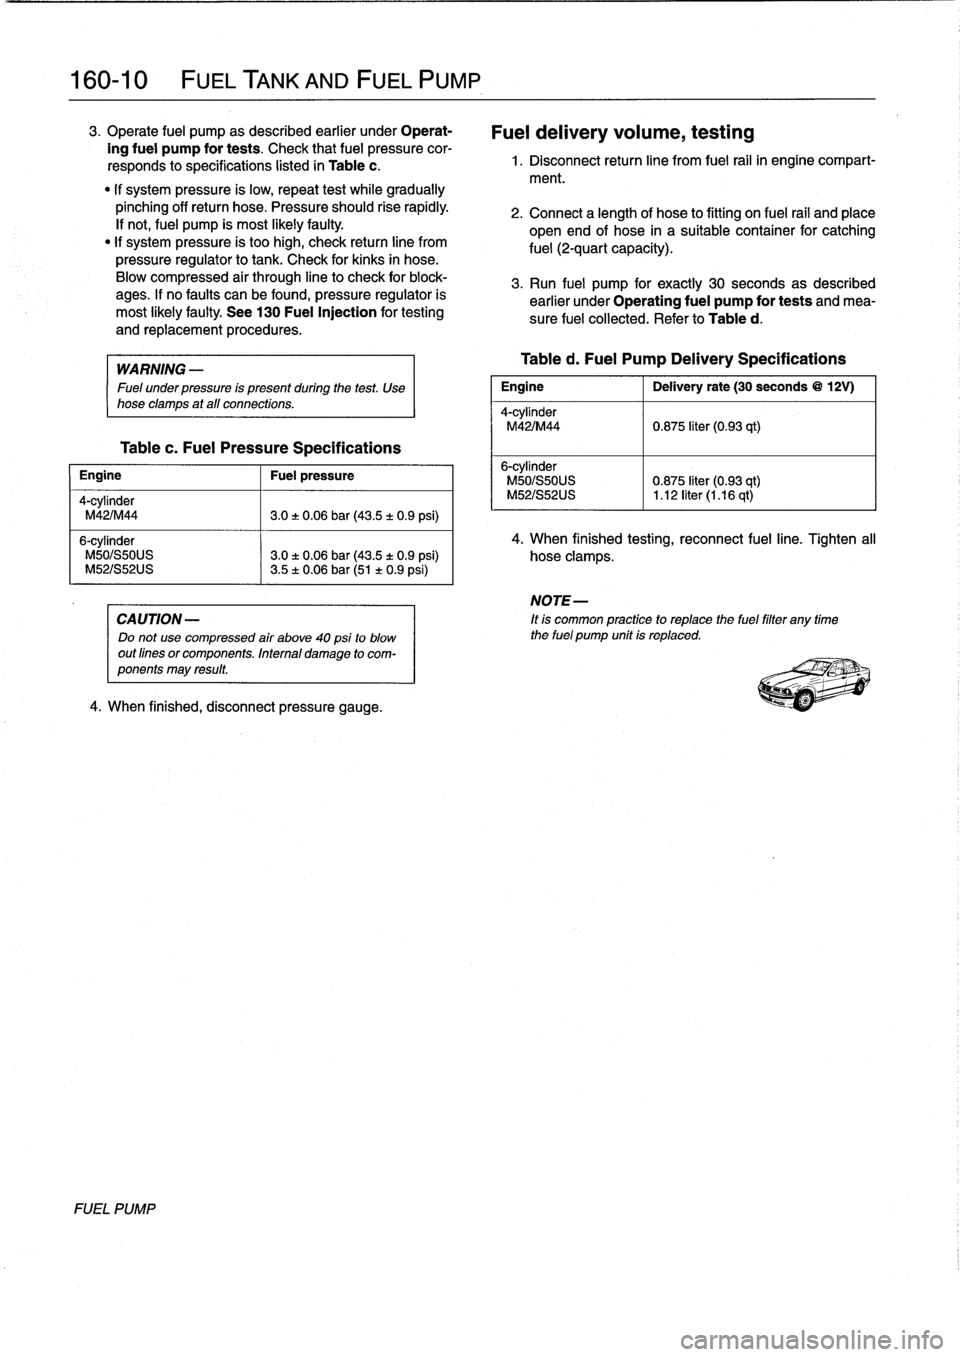 BMW 325i 1994 E36 Workshop Manual 
160-
1
0

	

FUEL
TANK
AND
FUEL
PUMP

3
.
Operate
fuel
pump
as
described
earlier
under
Operat-

ing
fuel
pump
for
tests
.
Check
that
fuel
pressure
cor-

responds
to
specifications
listed
in
Table
c
.